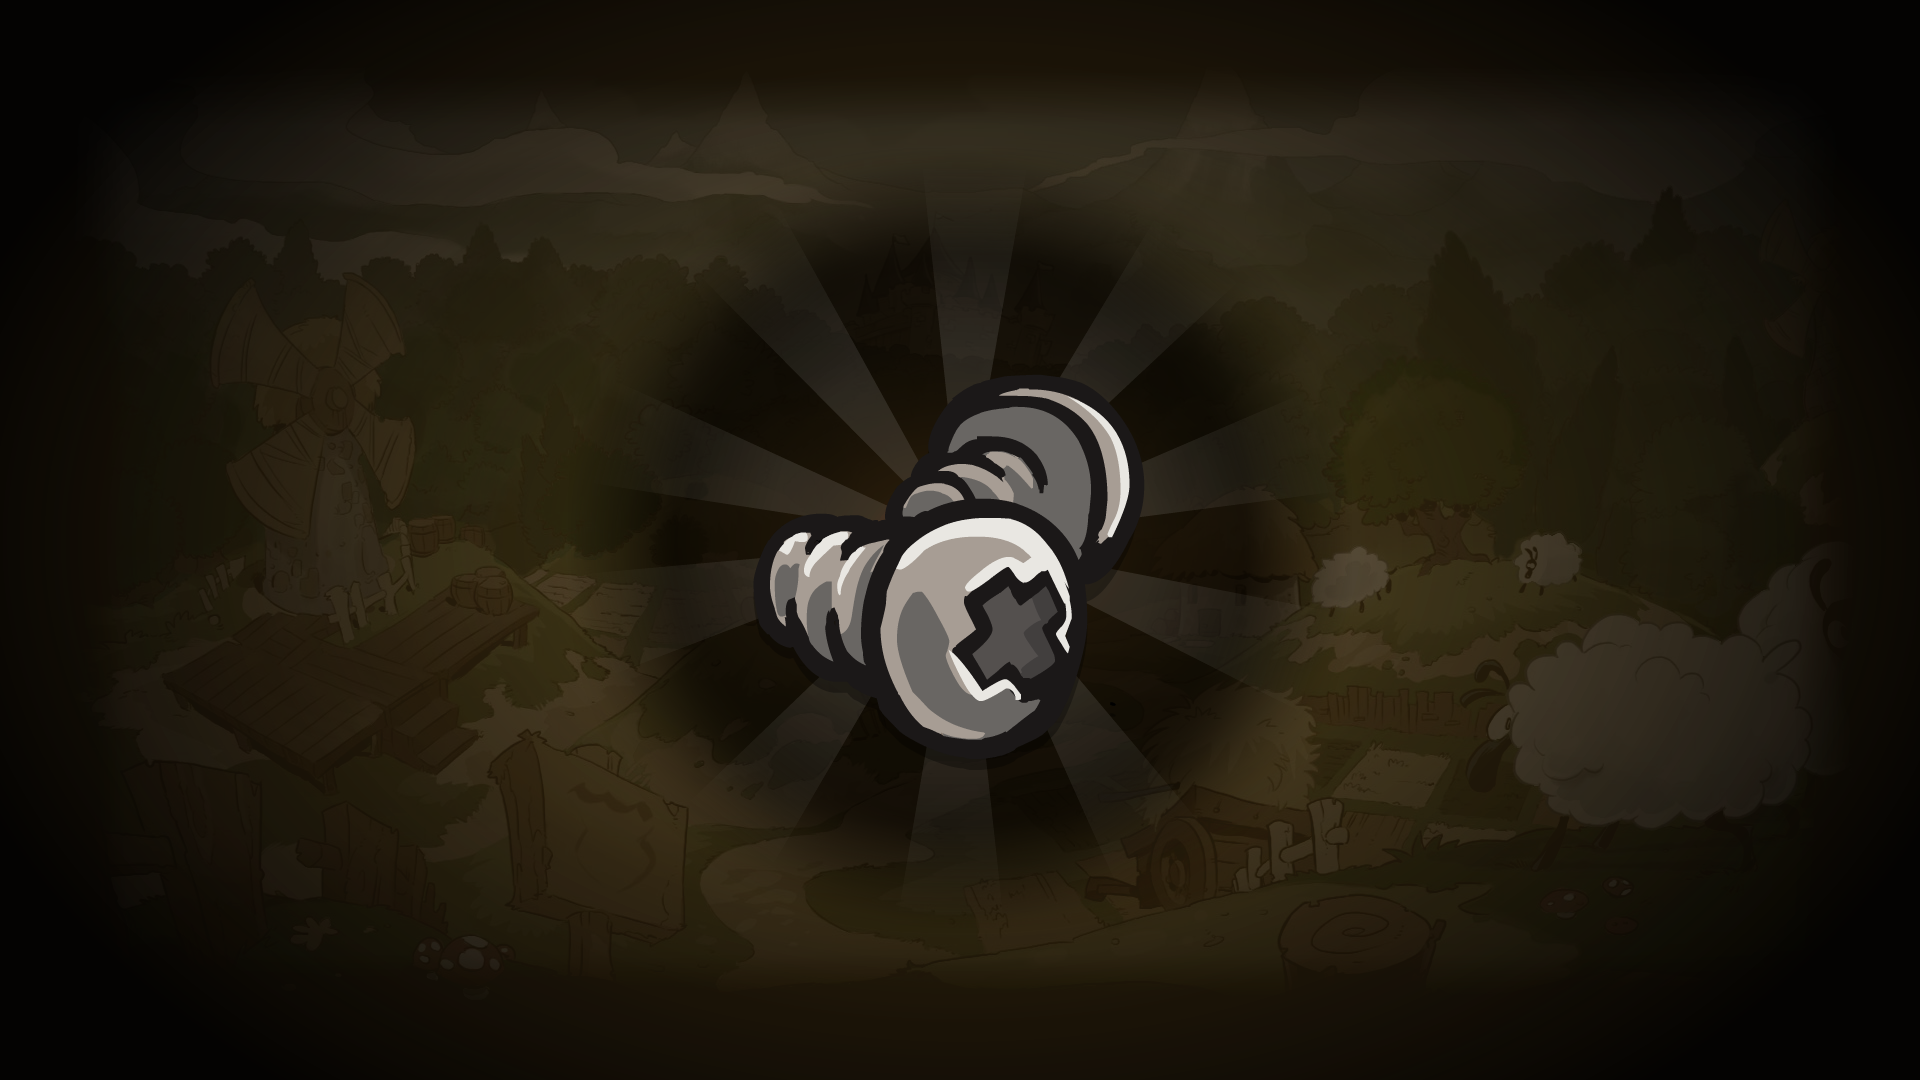 Icon for Nuts and Bolts